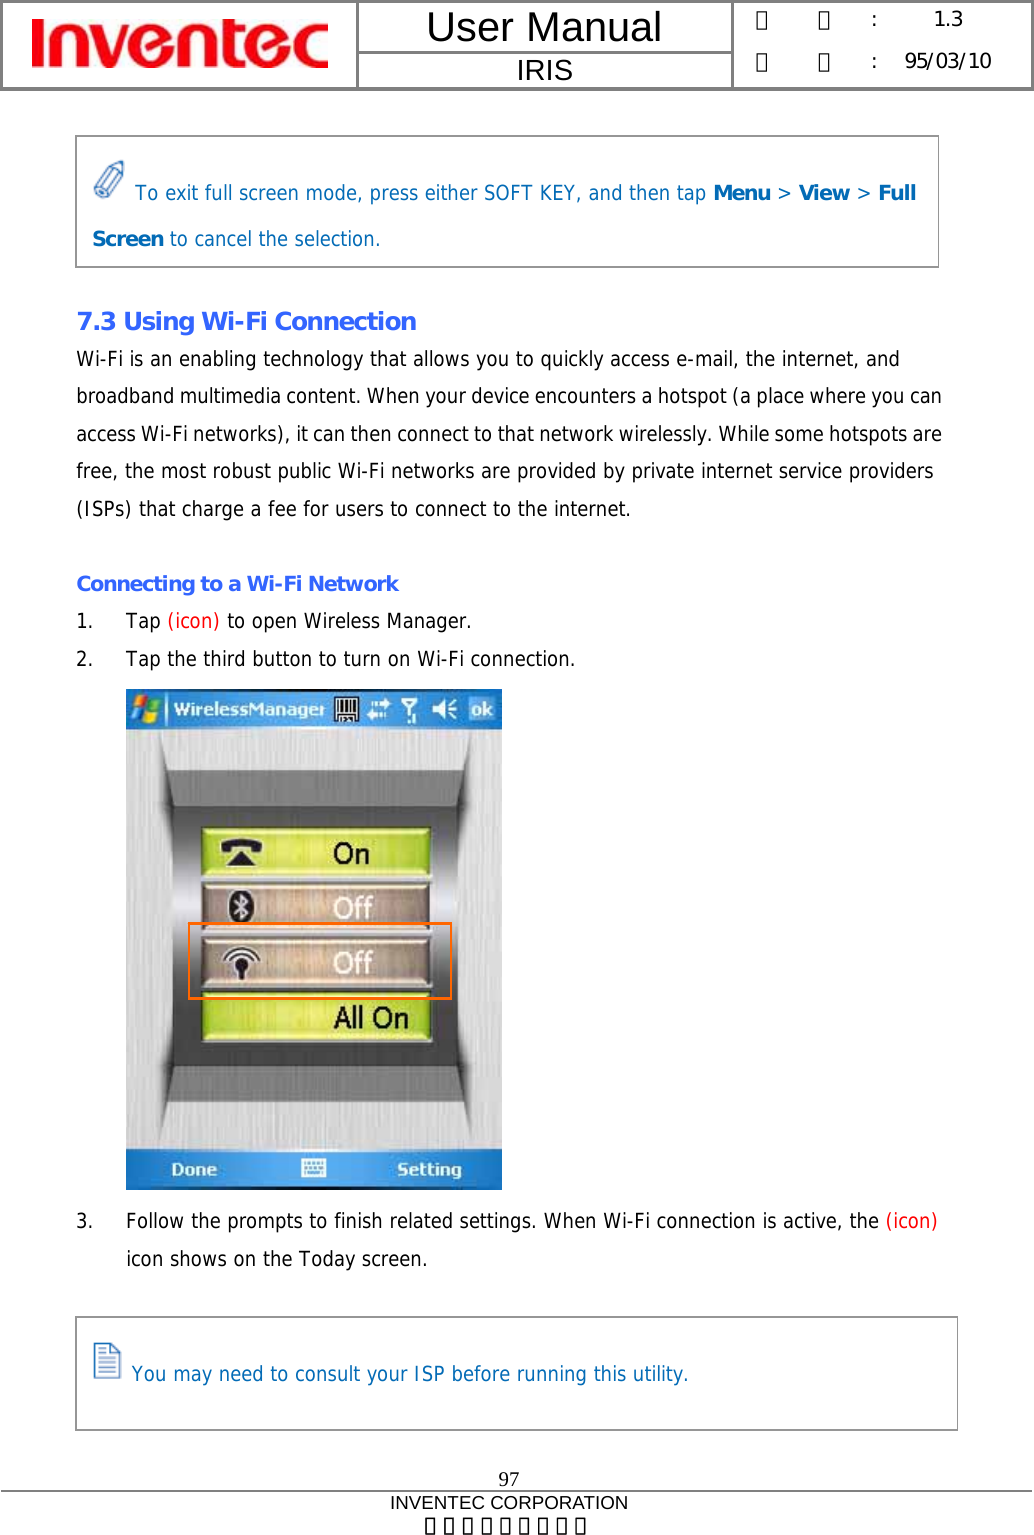 User Manual  IRIS 版    本 :  1.3 日    期 : 95/03/10  97 INVENTEC CORPORATION 英業達股份有限公司       7.3 Using Wi-Fi Connection Wi-Fi is an enabling technology that allows you to quickly access e-mail, the internet, and broadband multimedia content. When your device encounters a hotspot (a place where you can access Wi-Fi networks), it can then connect to that network wirelessly. While some hotspots are free, the most robust public Wi-Fi networks are provided by private internet service providers (ISPs) that charge a fee for users to connect to the internet.  Connecting to a Wi-Fi Network 1. Tap (icon) to open Wireless Manager. 2. Tap the third button to turn on Wi-Fi connection.  3. Follow the prompts to finish related settings. When Wi-Fi connection is active, the (icon) icon shows on the Today screen.  To exit full screen mode, press either SOFT KEY, and then tap Menu &gt; View &gt; Full Screen to cancel the selection.  You may need to consult your ISP before running this utility. 